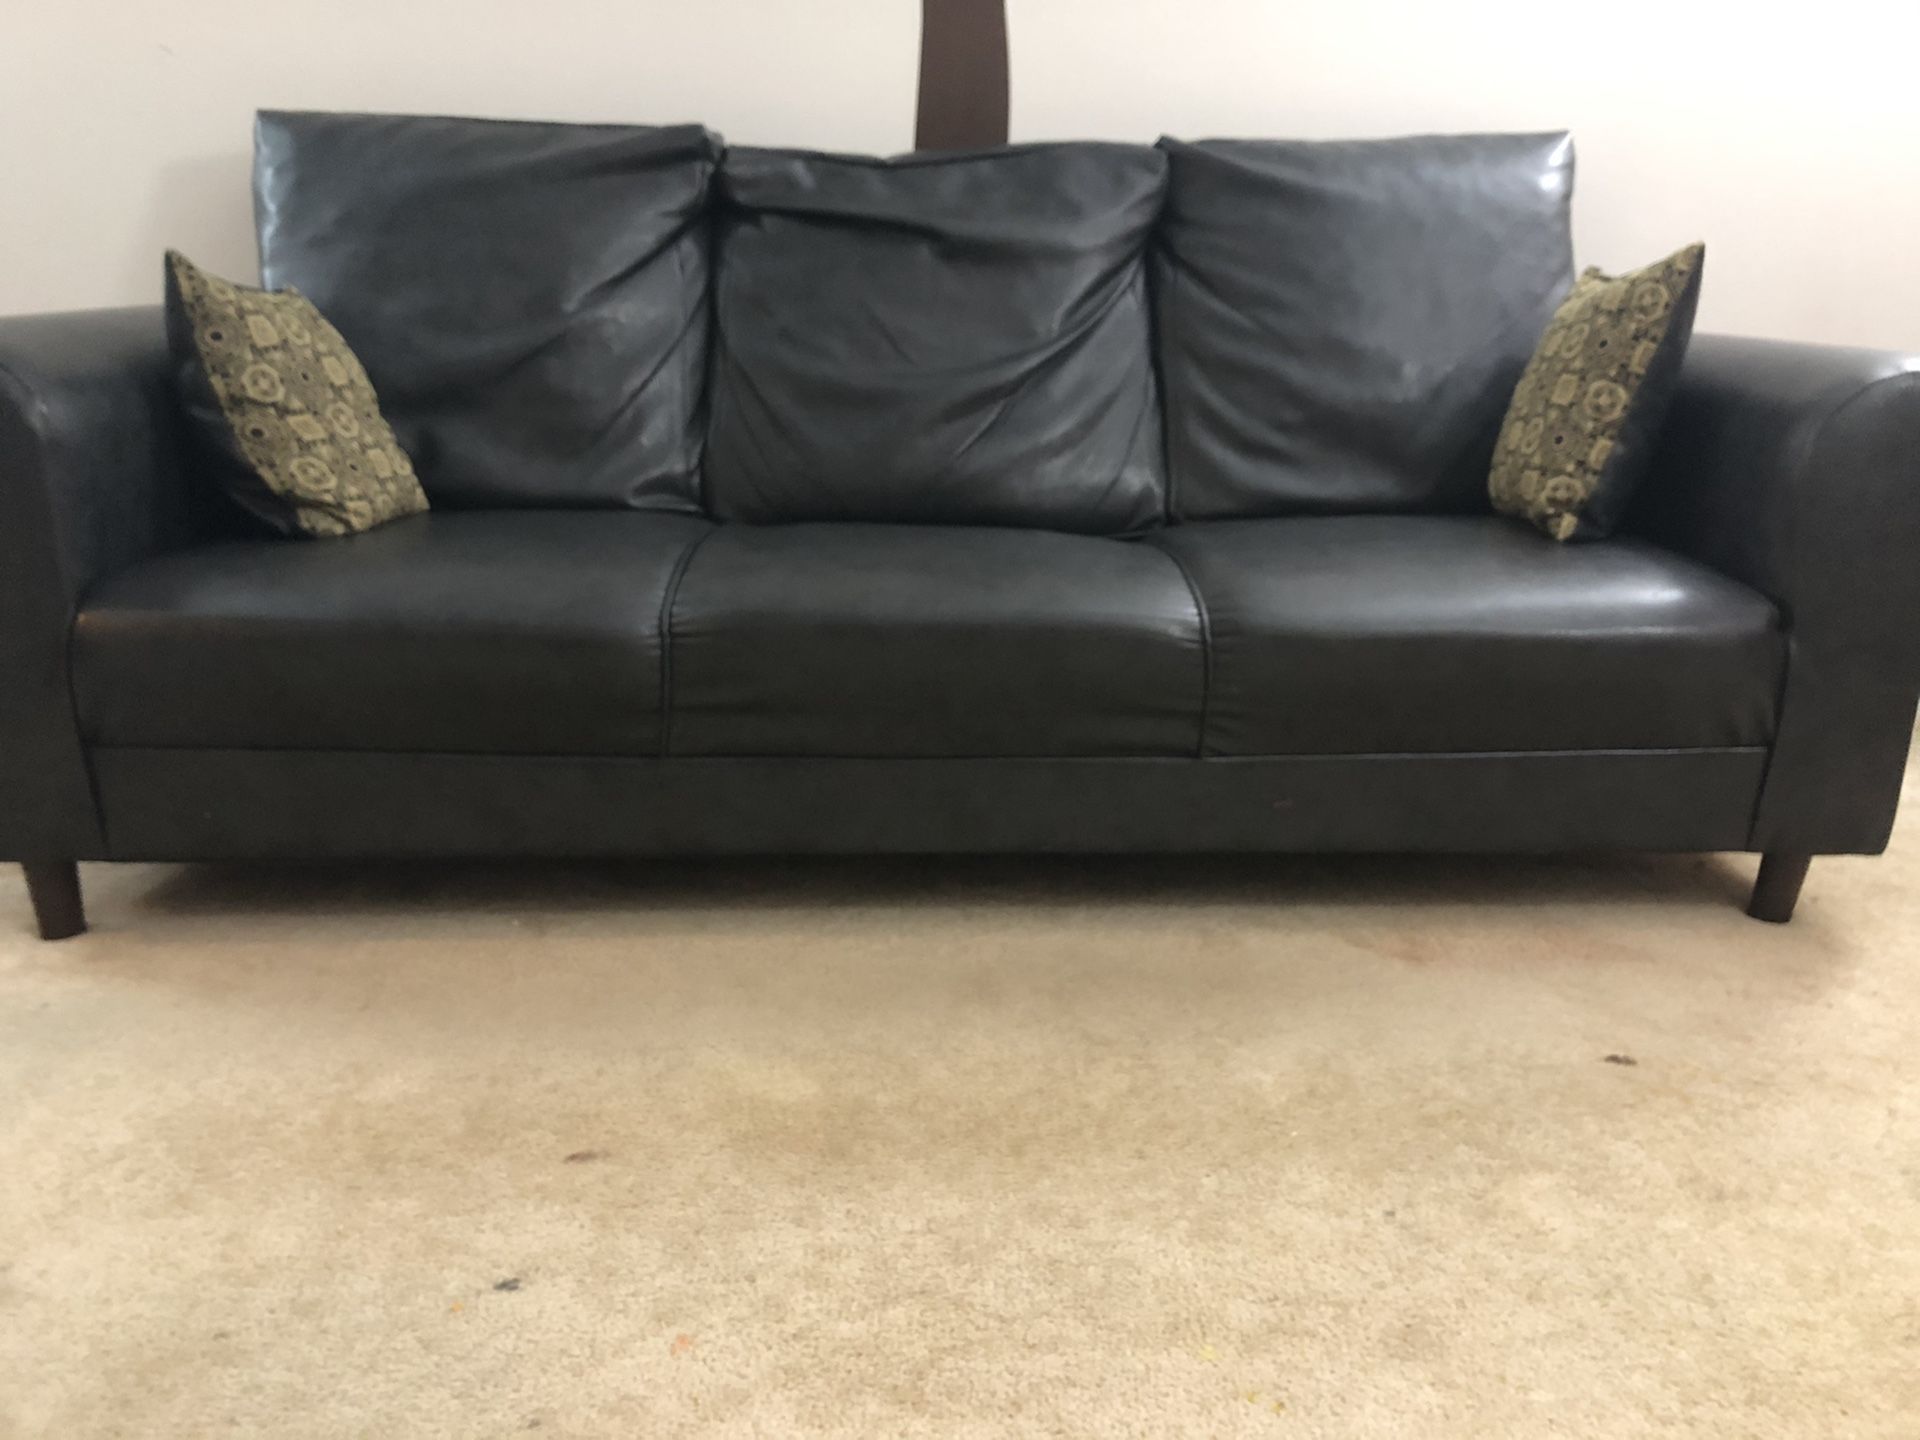 Leather couch on sale